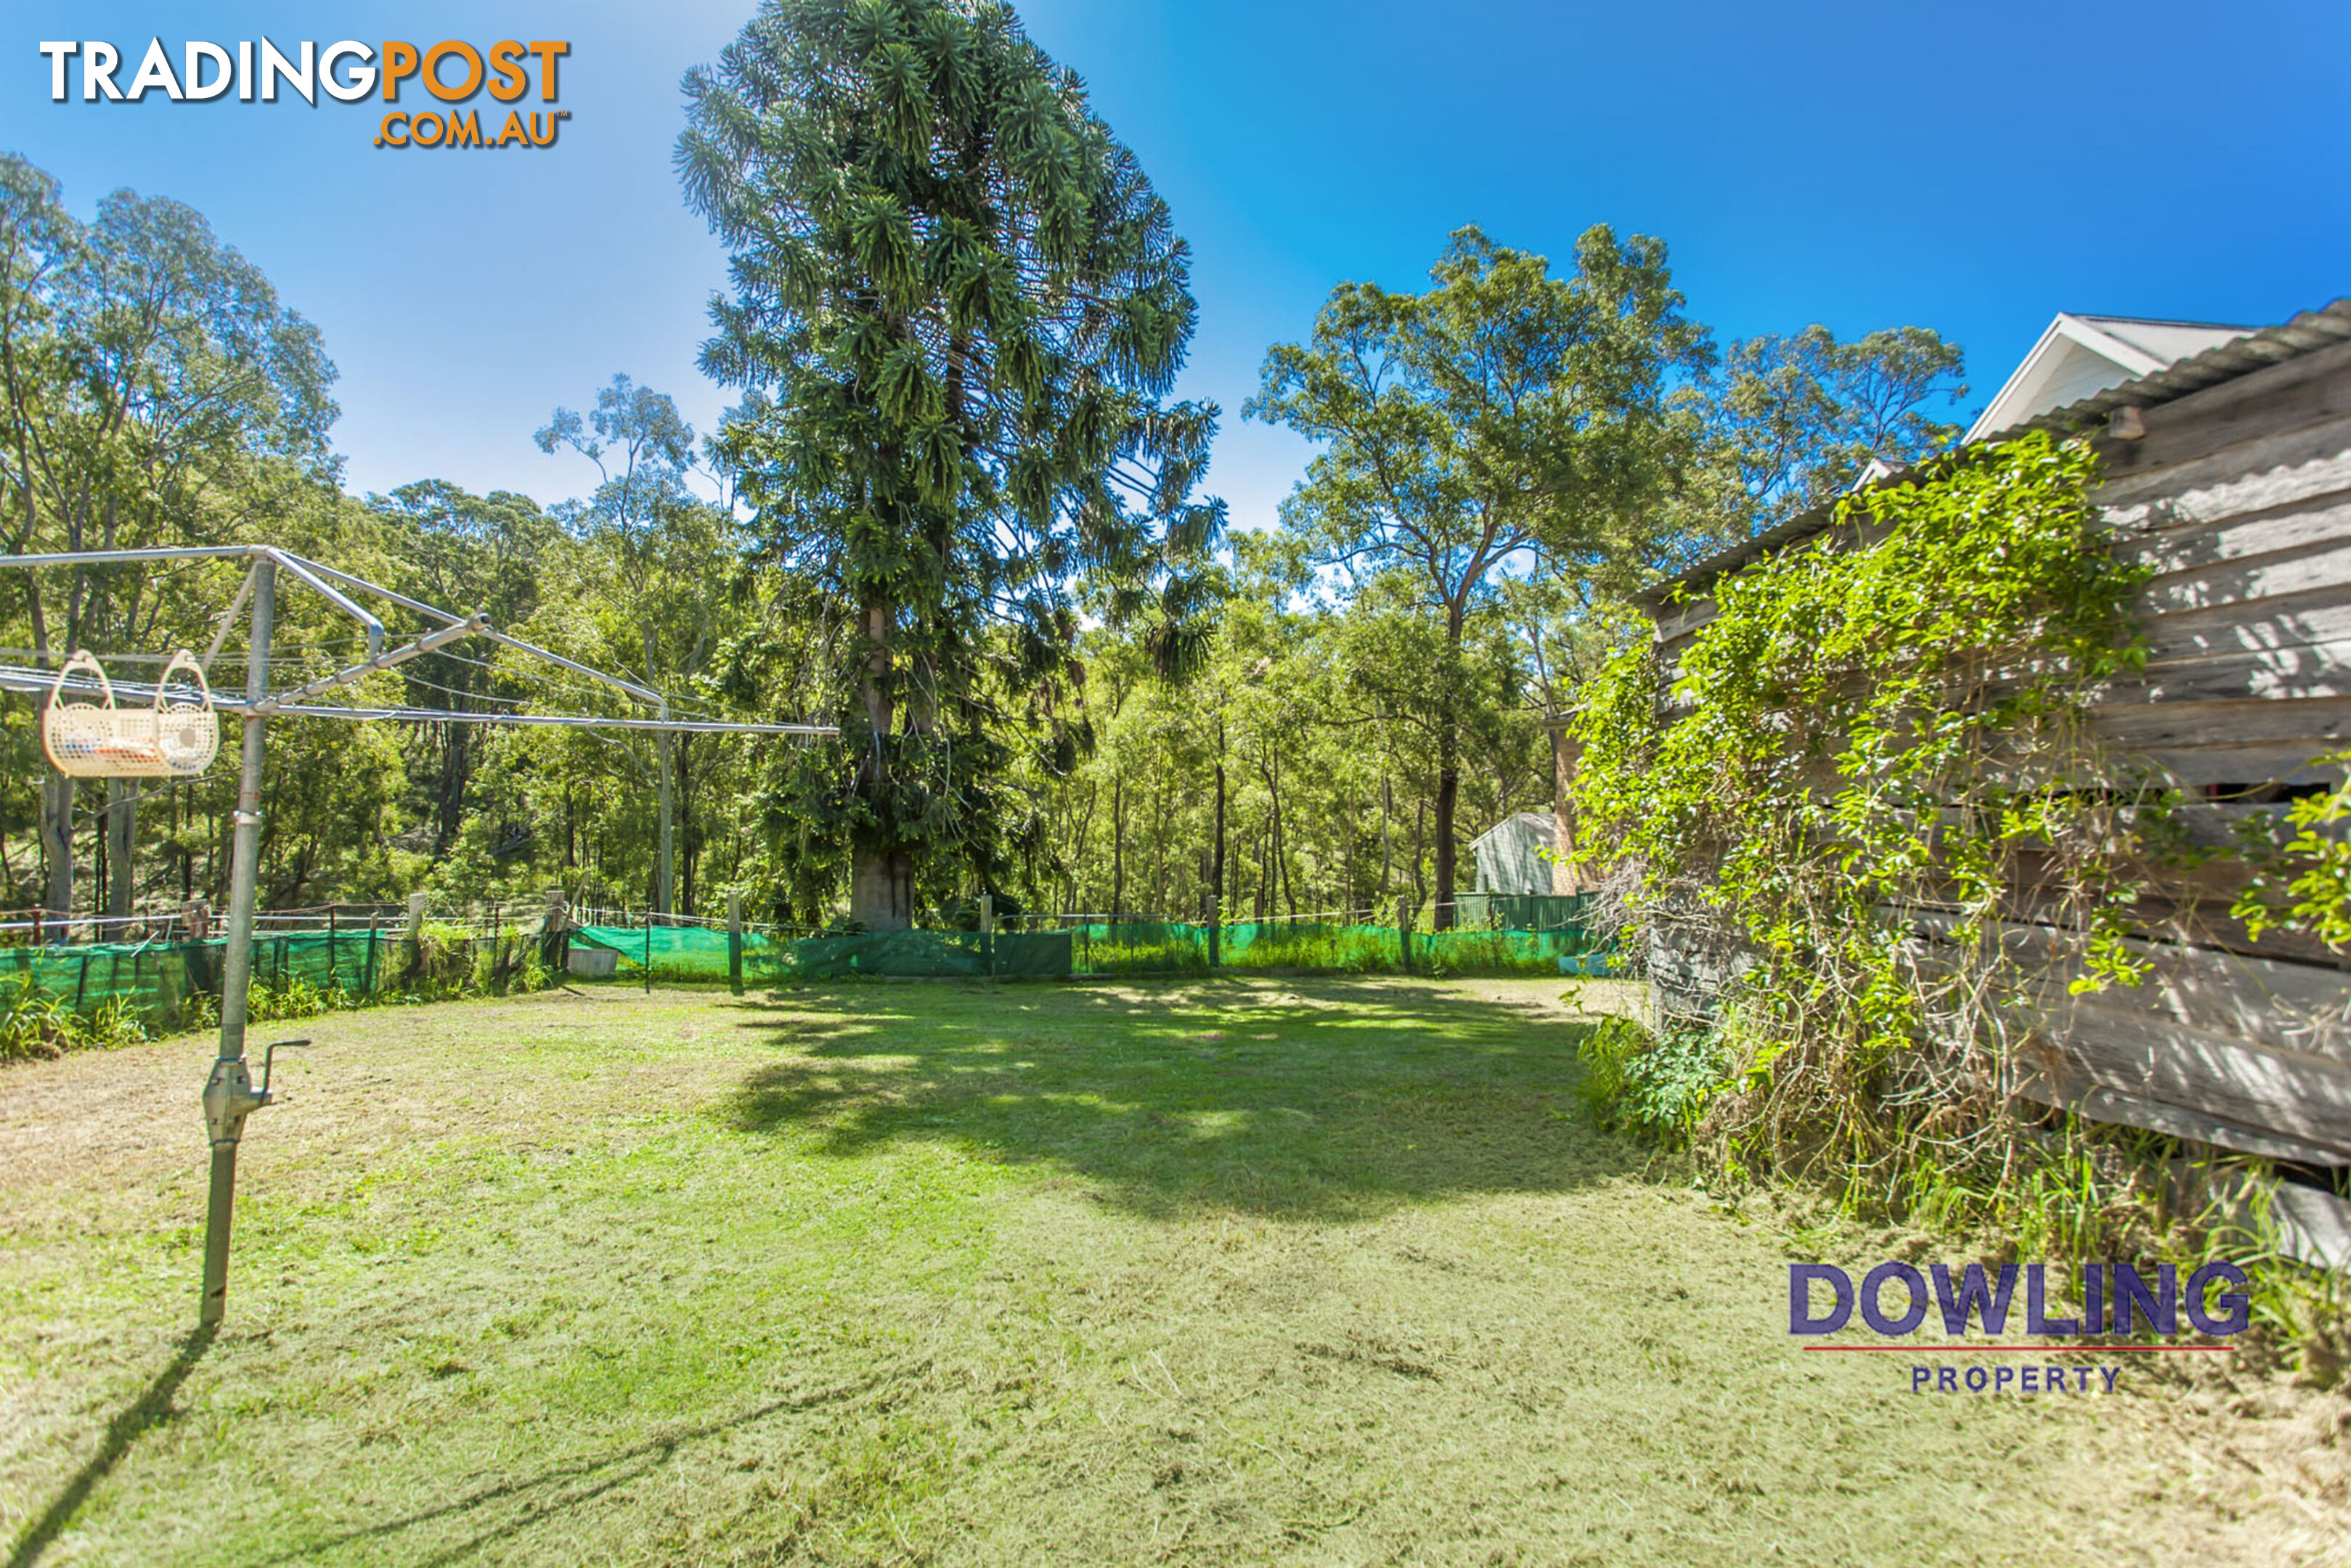 47 EARL STREET CLARENCE TOWN NSW 2321